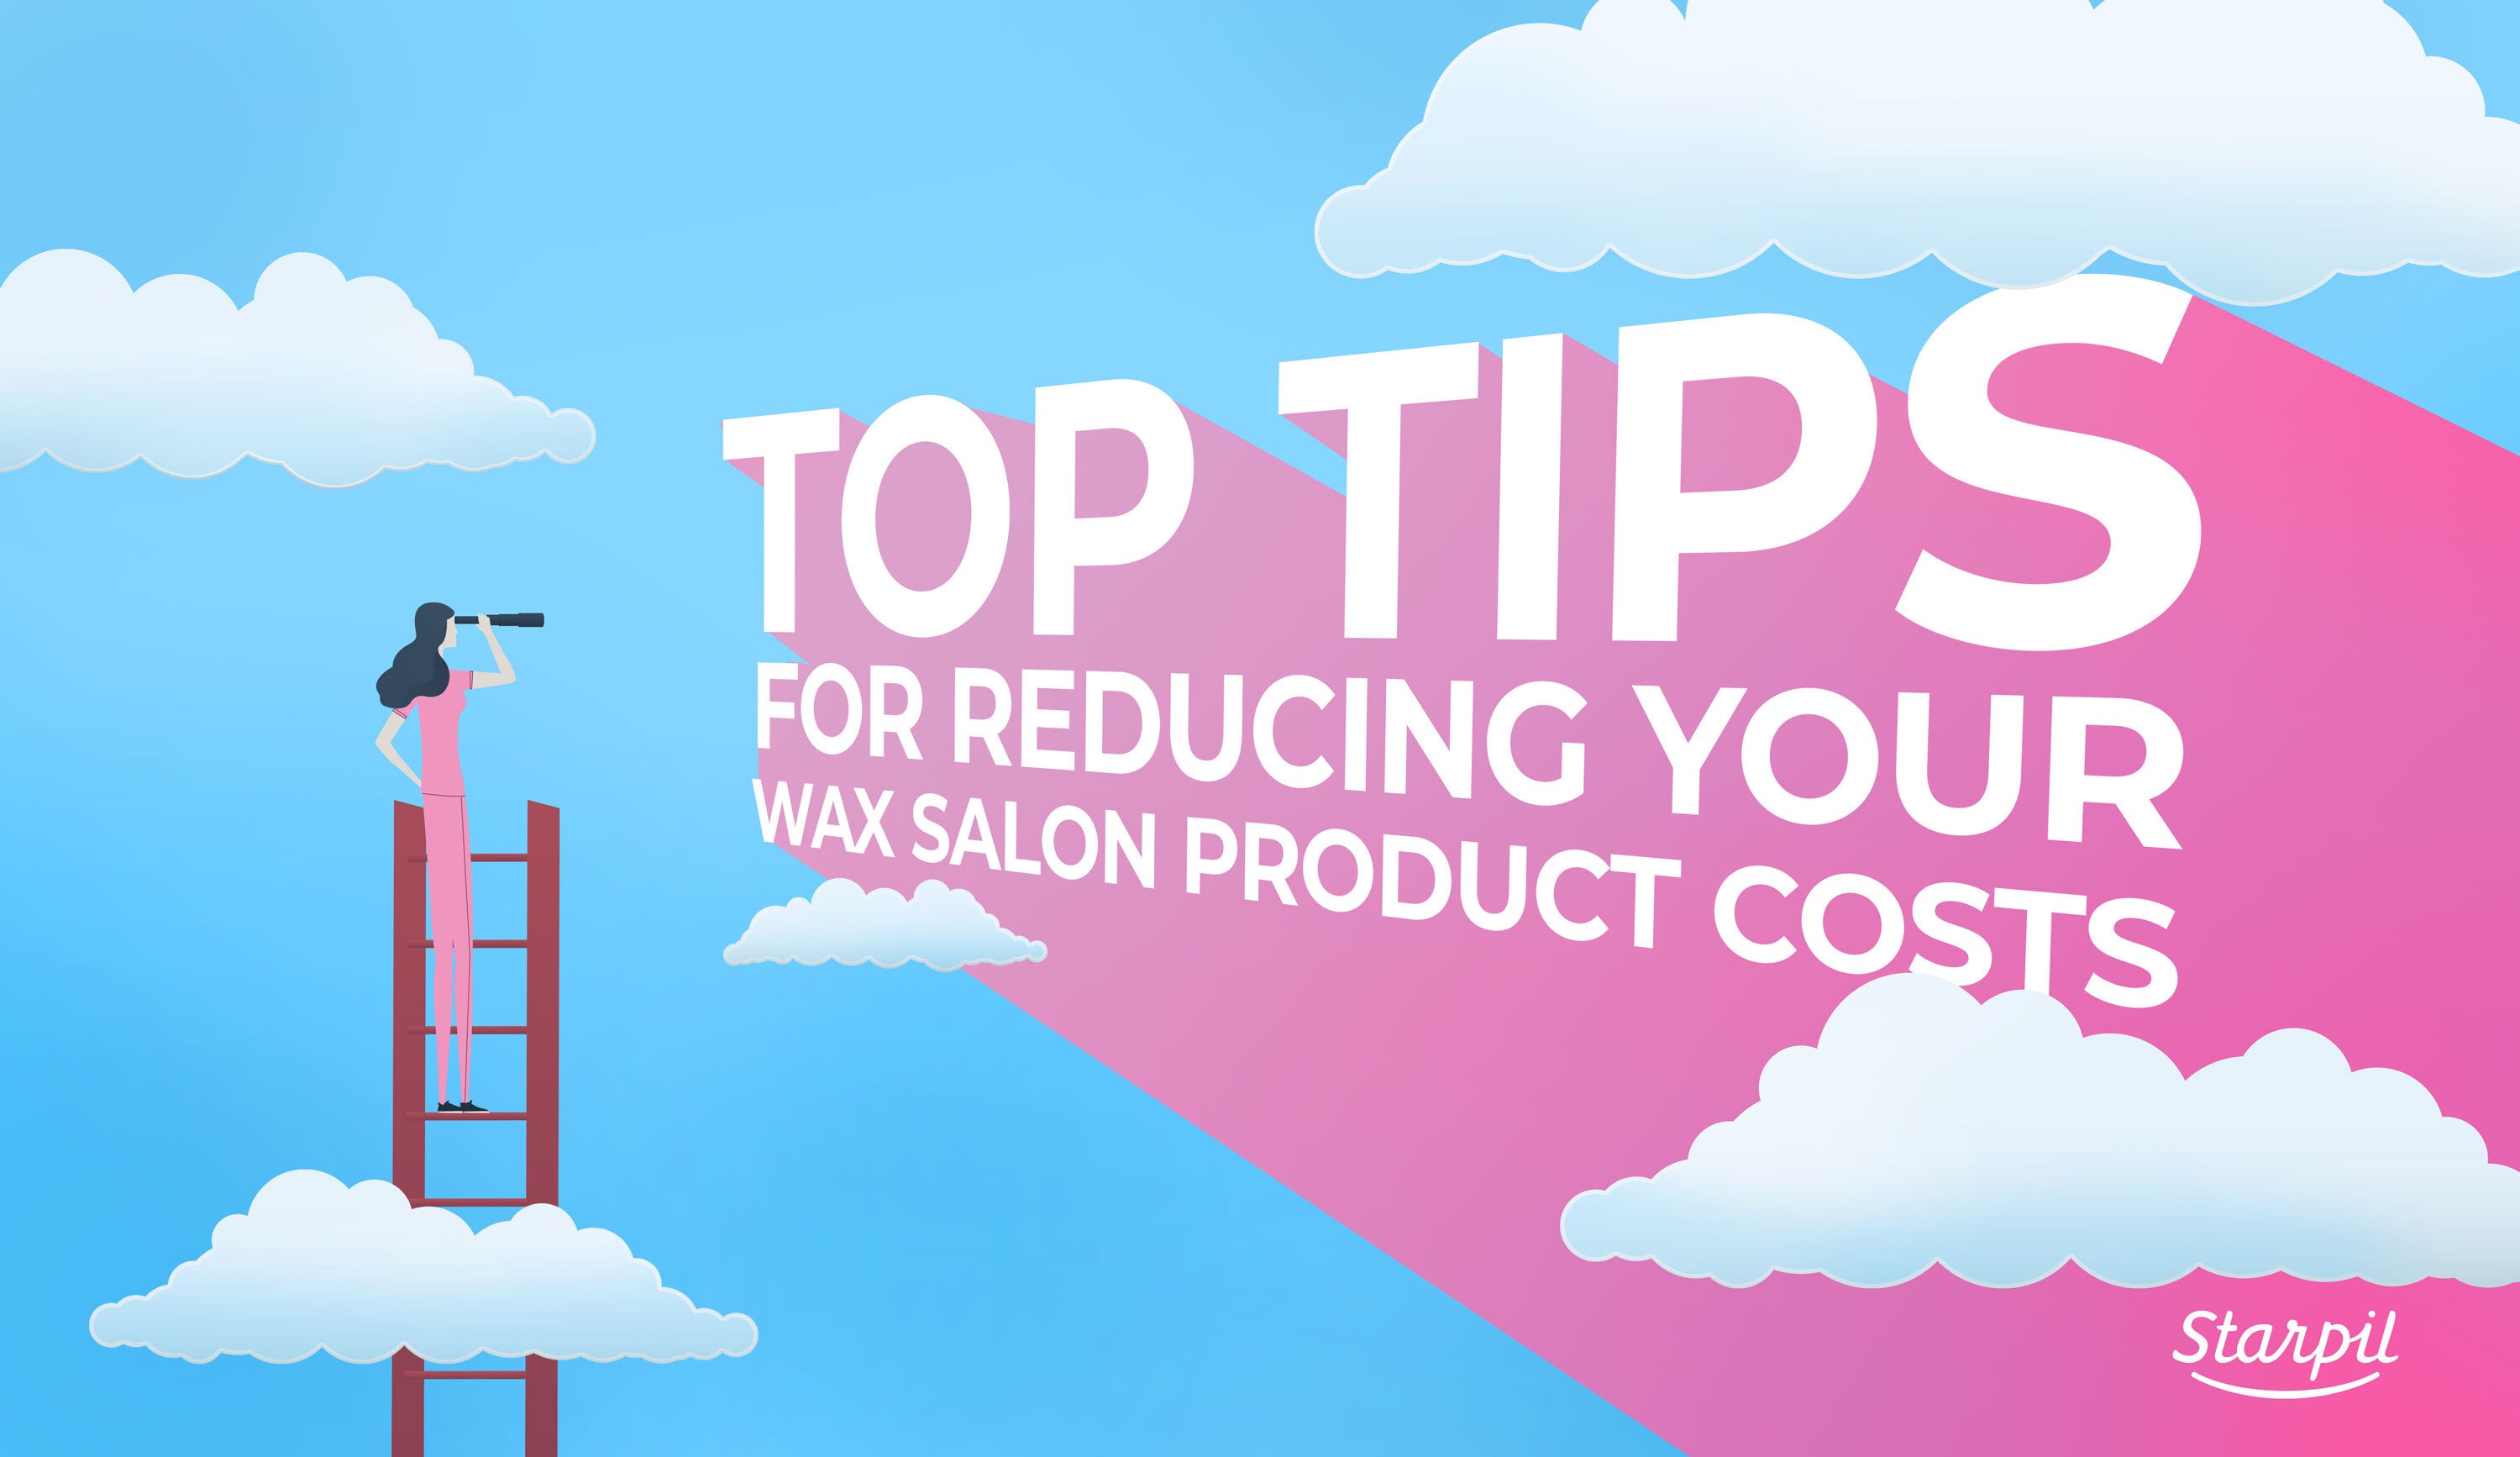 Top Tips for Reducing Your Wax Salon Product Costs